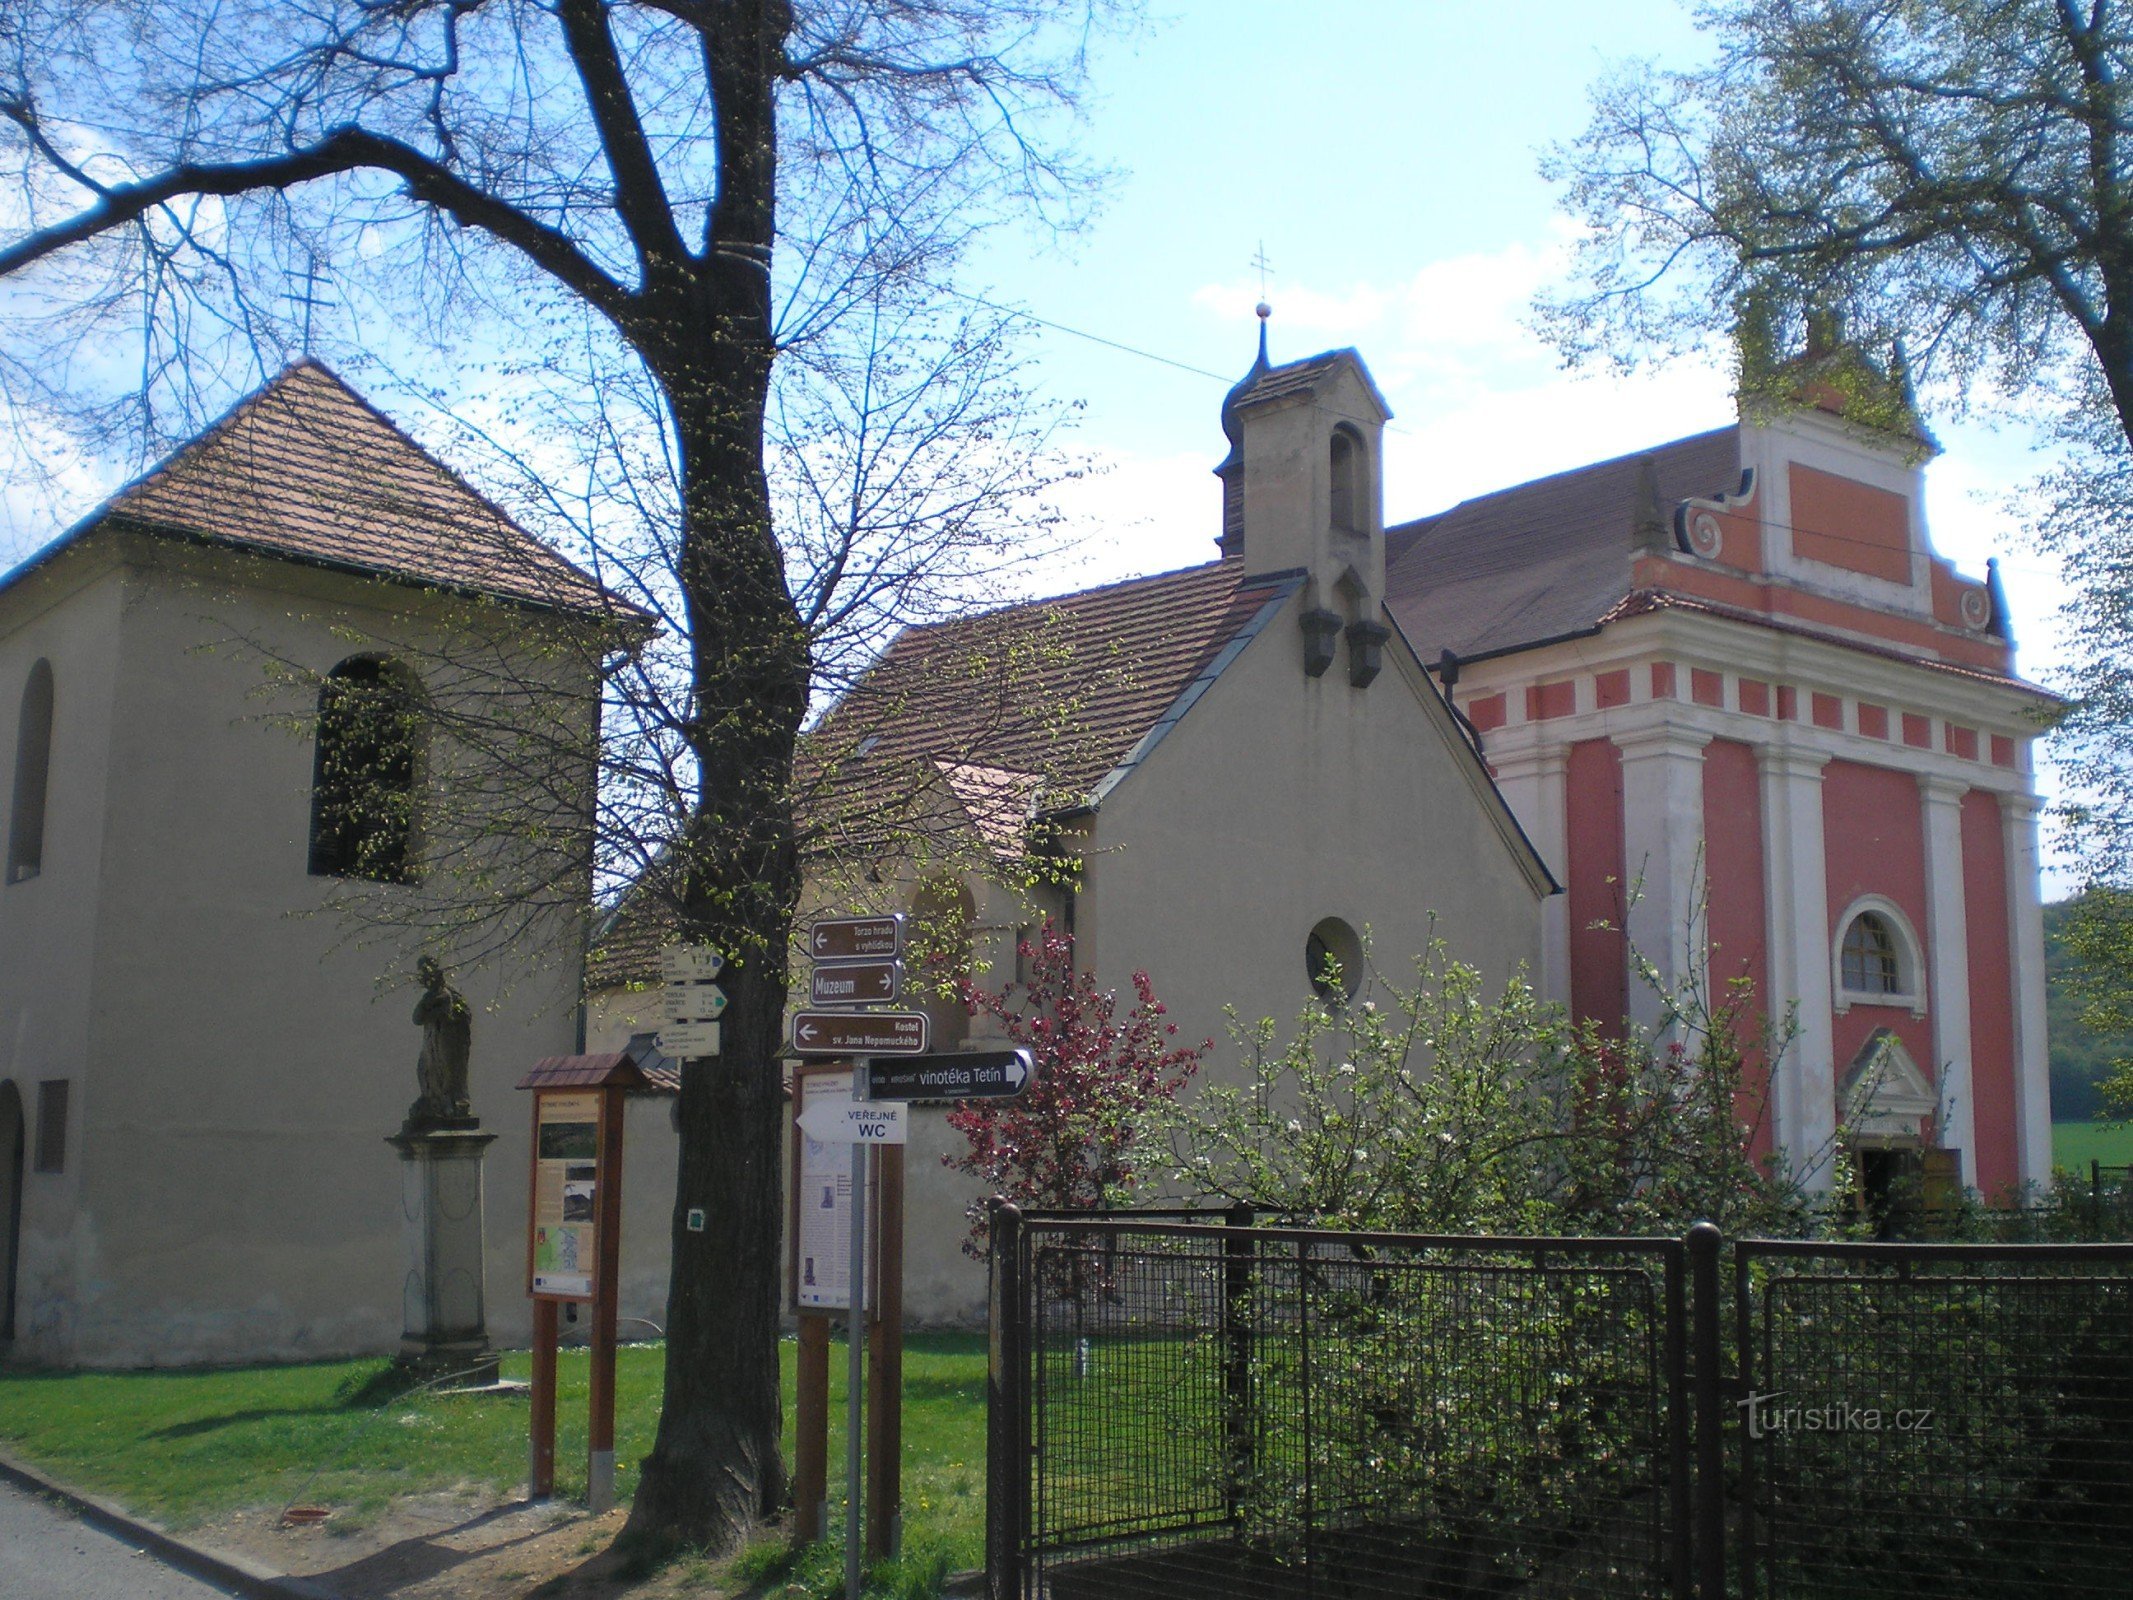 Churches of St. Catherine and St. Ludmila